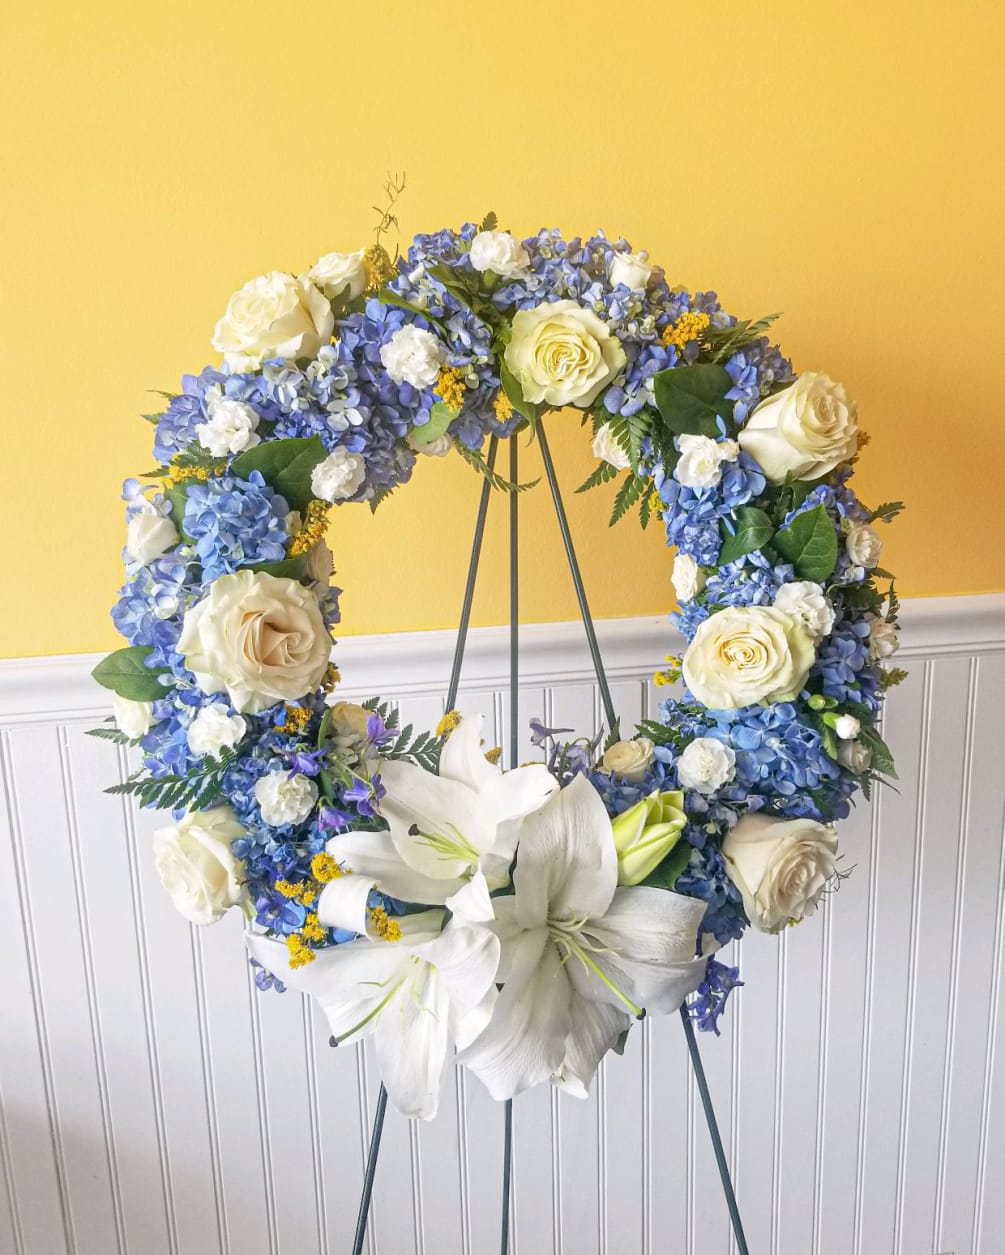 Our majestic blue and white standing spray wreath will help honor their